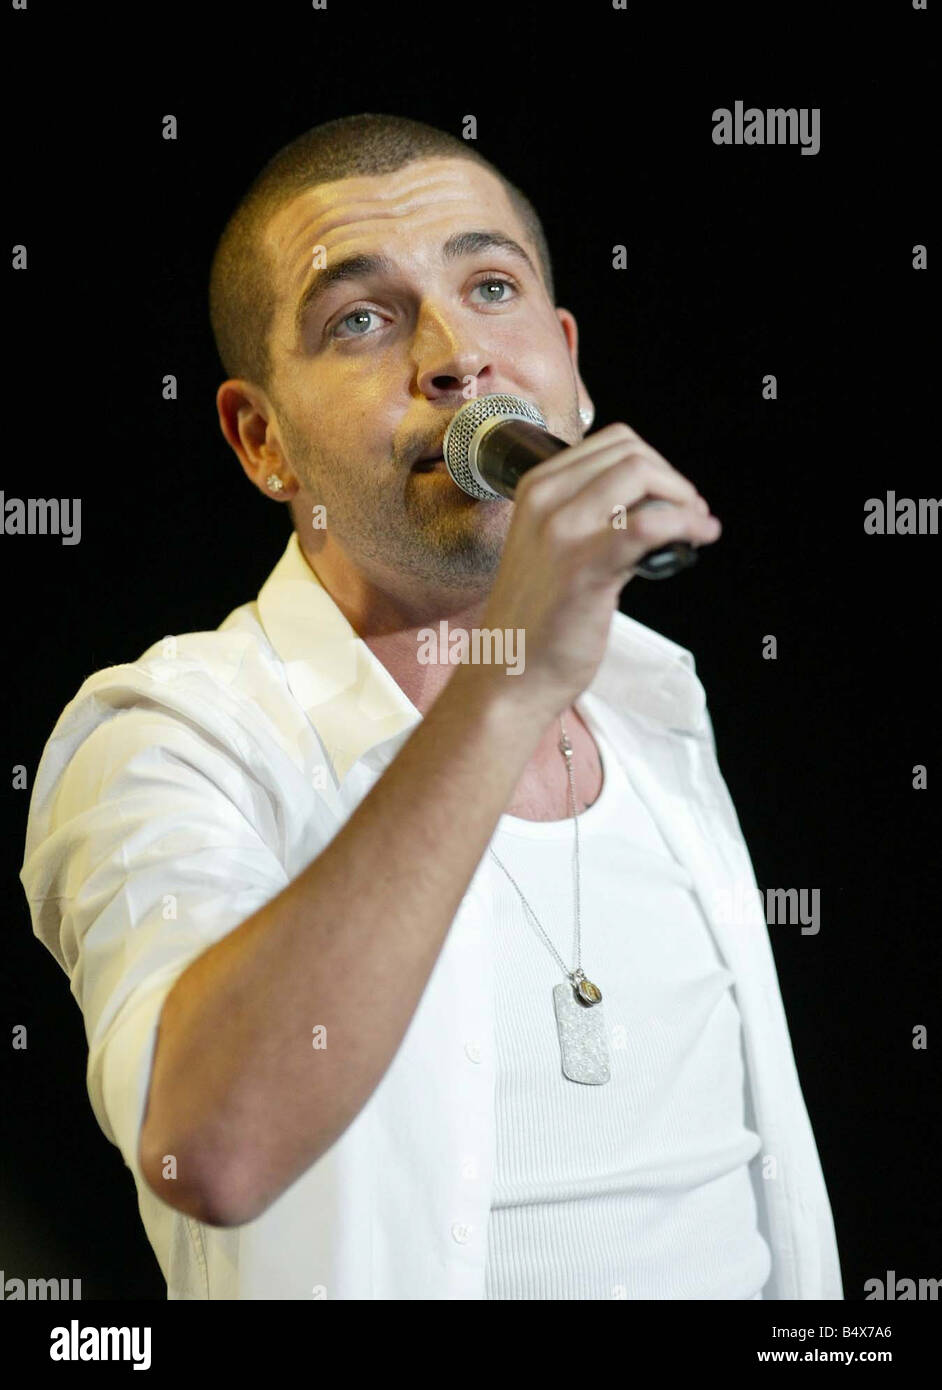 X Factor Winner Shayne Ward At The X Factor Concert In Manchester